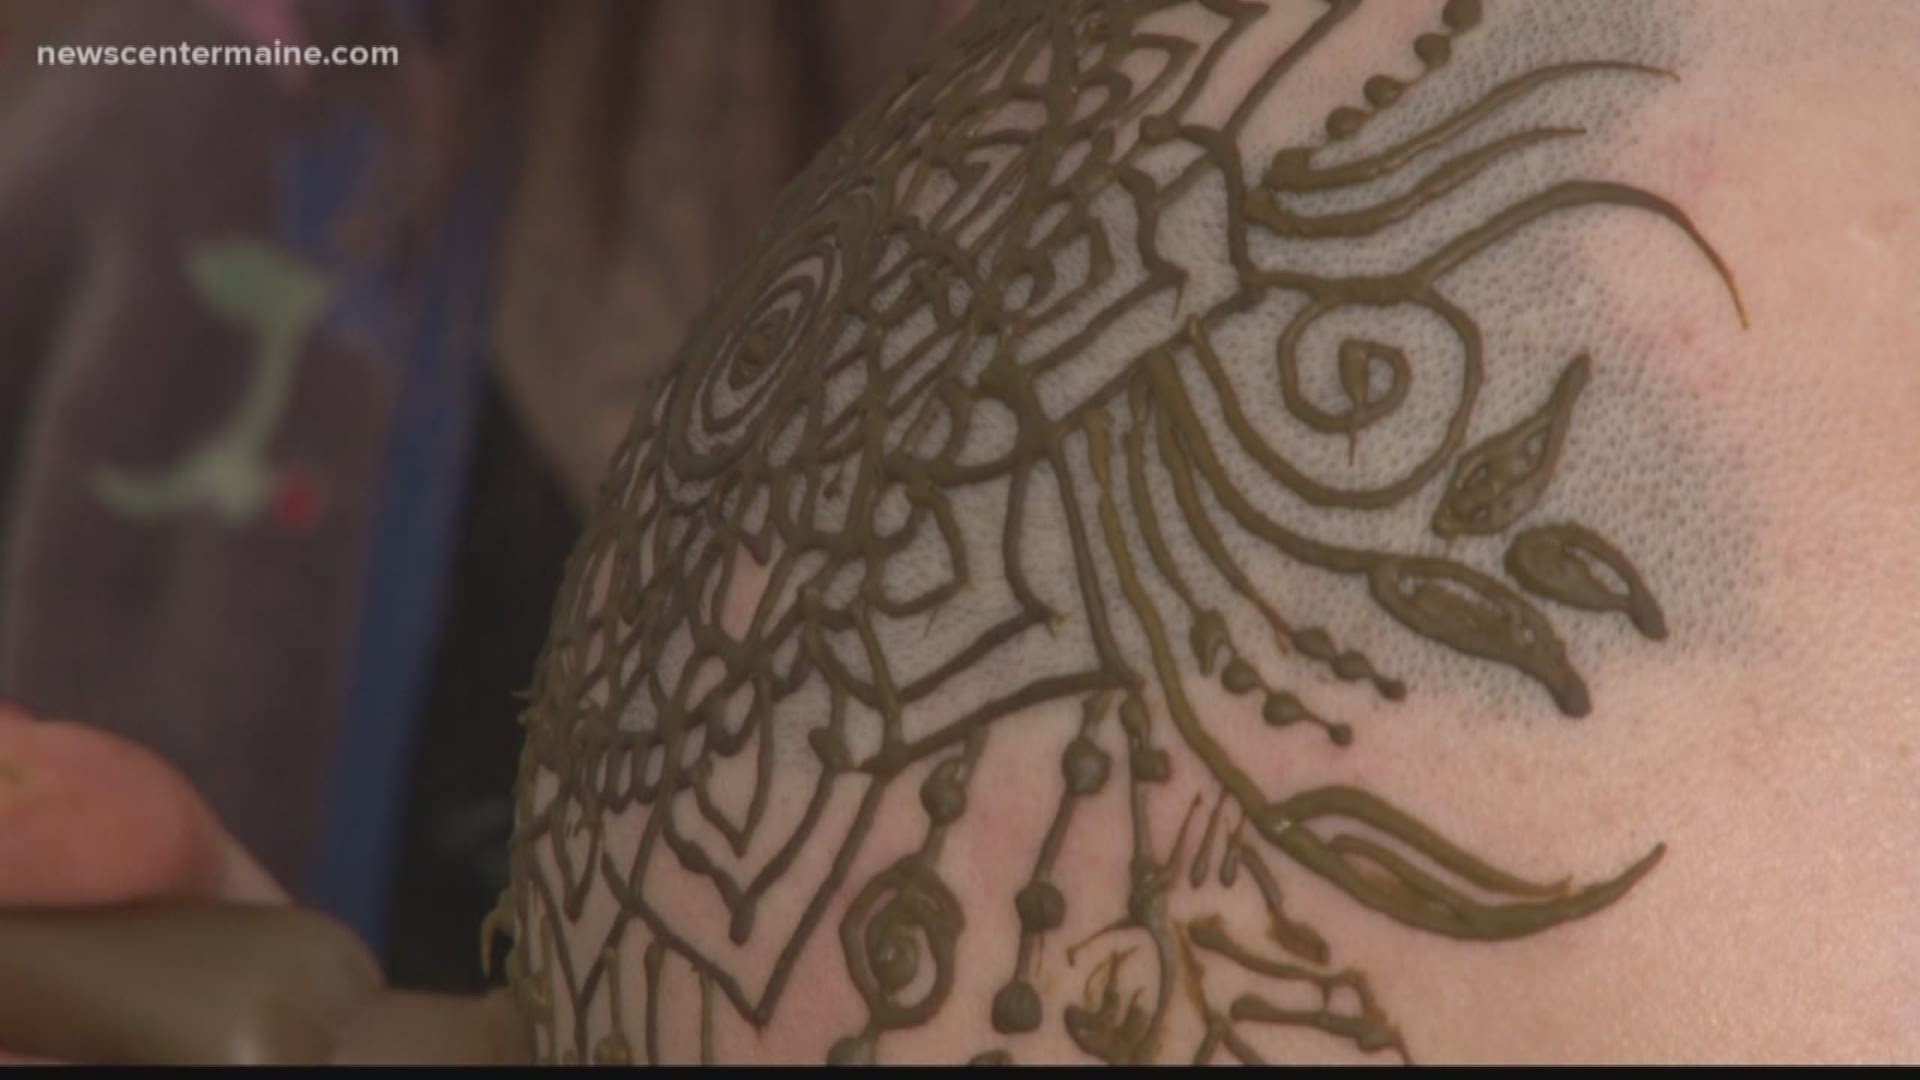 Mary Schmaling-Kearns draws henna tattoos on the heads of those who have experienced baldness, most of whom are going through cancer treatments.